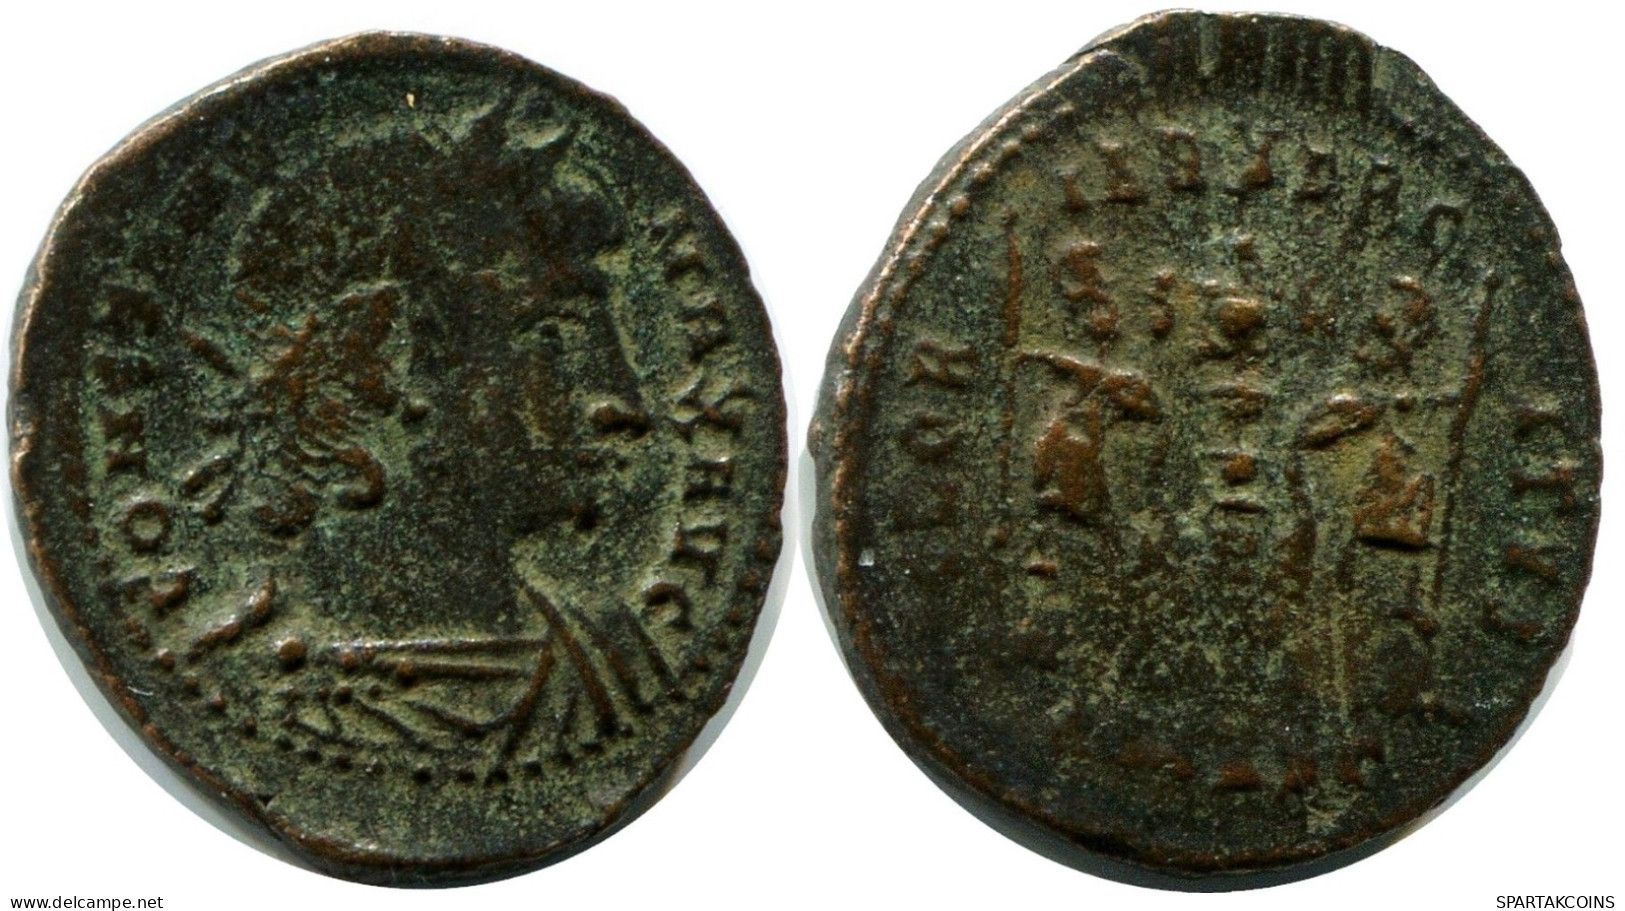 CONSTANS MINTED IN ALEKSANDRIA FROM THE ROYAL ONTARIO MUSEUM #ANC11387.14.U.A - El Impero Christiano (307 / 363)